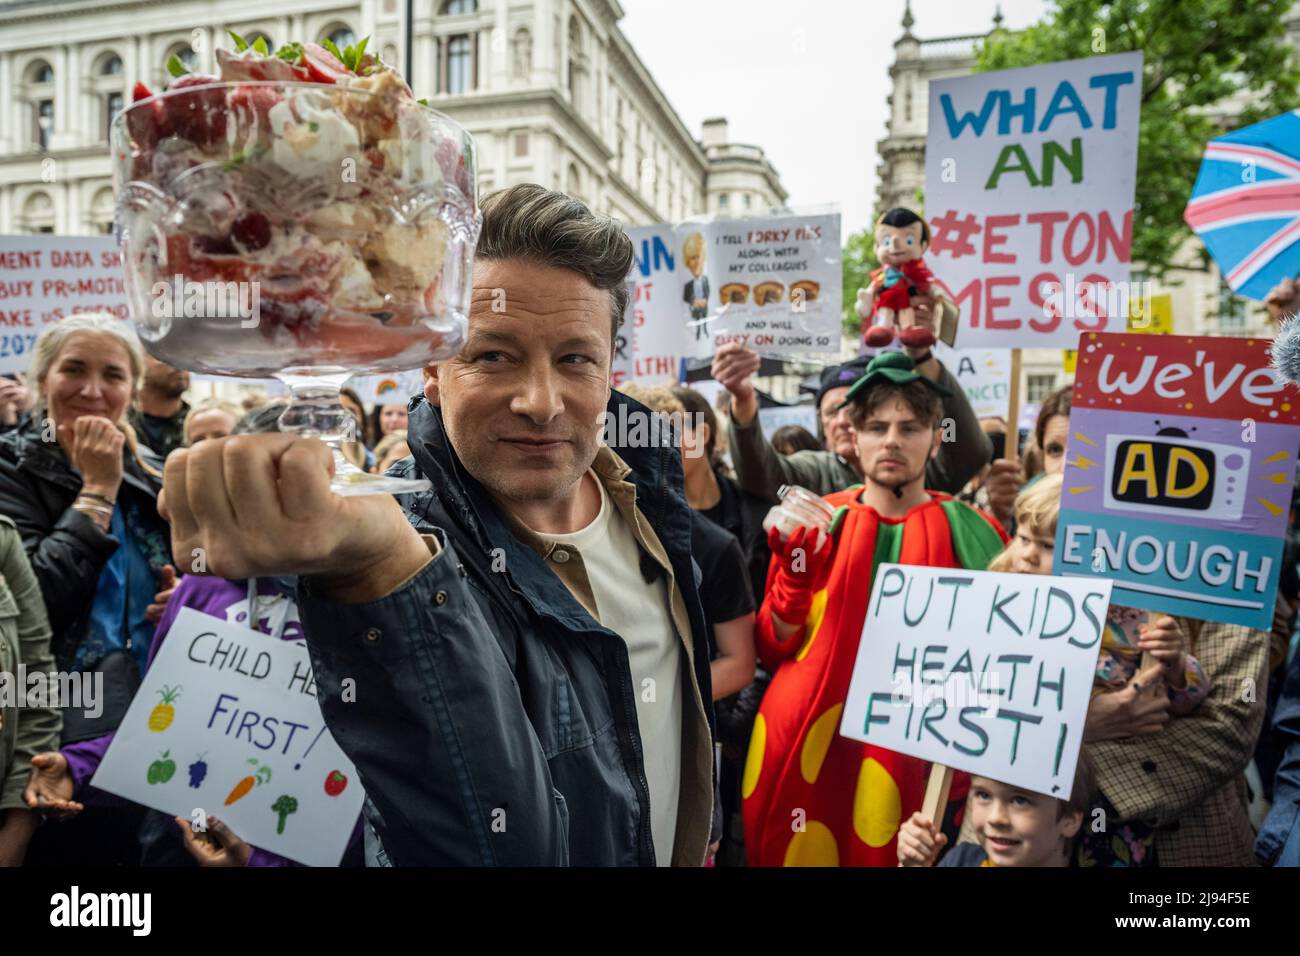 London, UK.  20 May 2022.  TV chef Jamie Oliver outside Downing Street at an Eton Mess protest.  To protect child health, protesters want the government to reverse its decision to defer for a year a ban on buy-one-get-one-free deals on unhealthy foods and a ban on TV junk food adverts before a 9pm watershed.  The government says the deferral will enable a review of the impact on budgets in the face of the cost-of-living crisis.  Eton Mess is a dessert that references where Boris Johnson, Prime Minister, went to school.  Credit: Stephen Chung / Alamy Live News Stock Photo